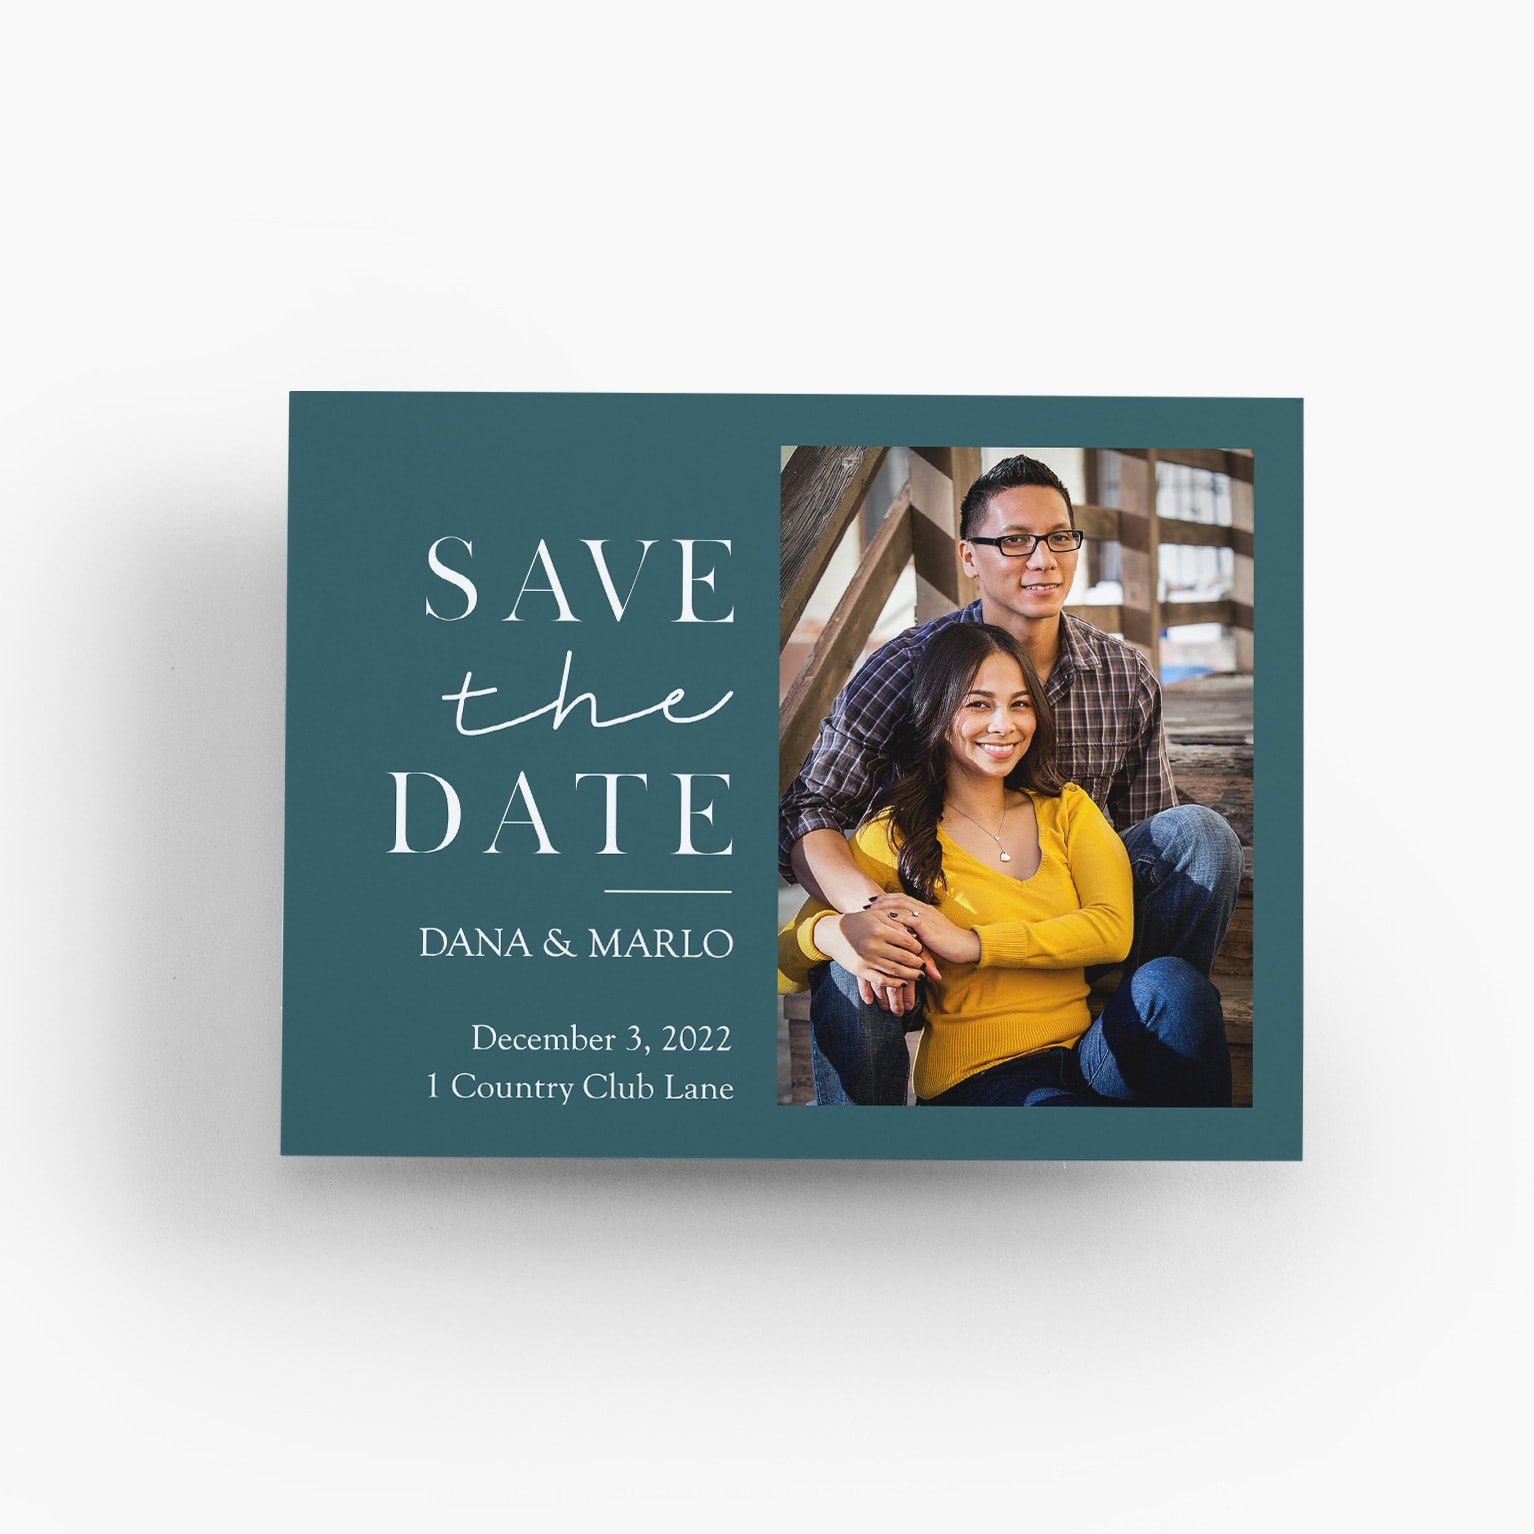 Save The Date Wording: Bridal Tips And Examples